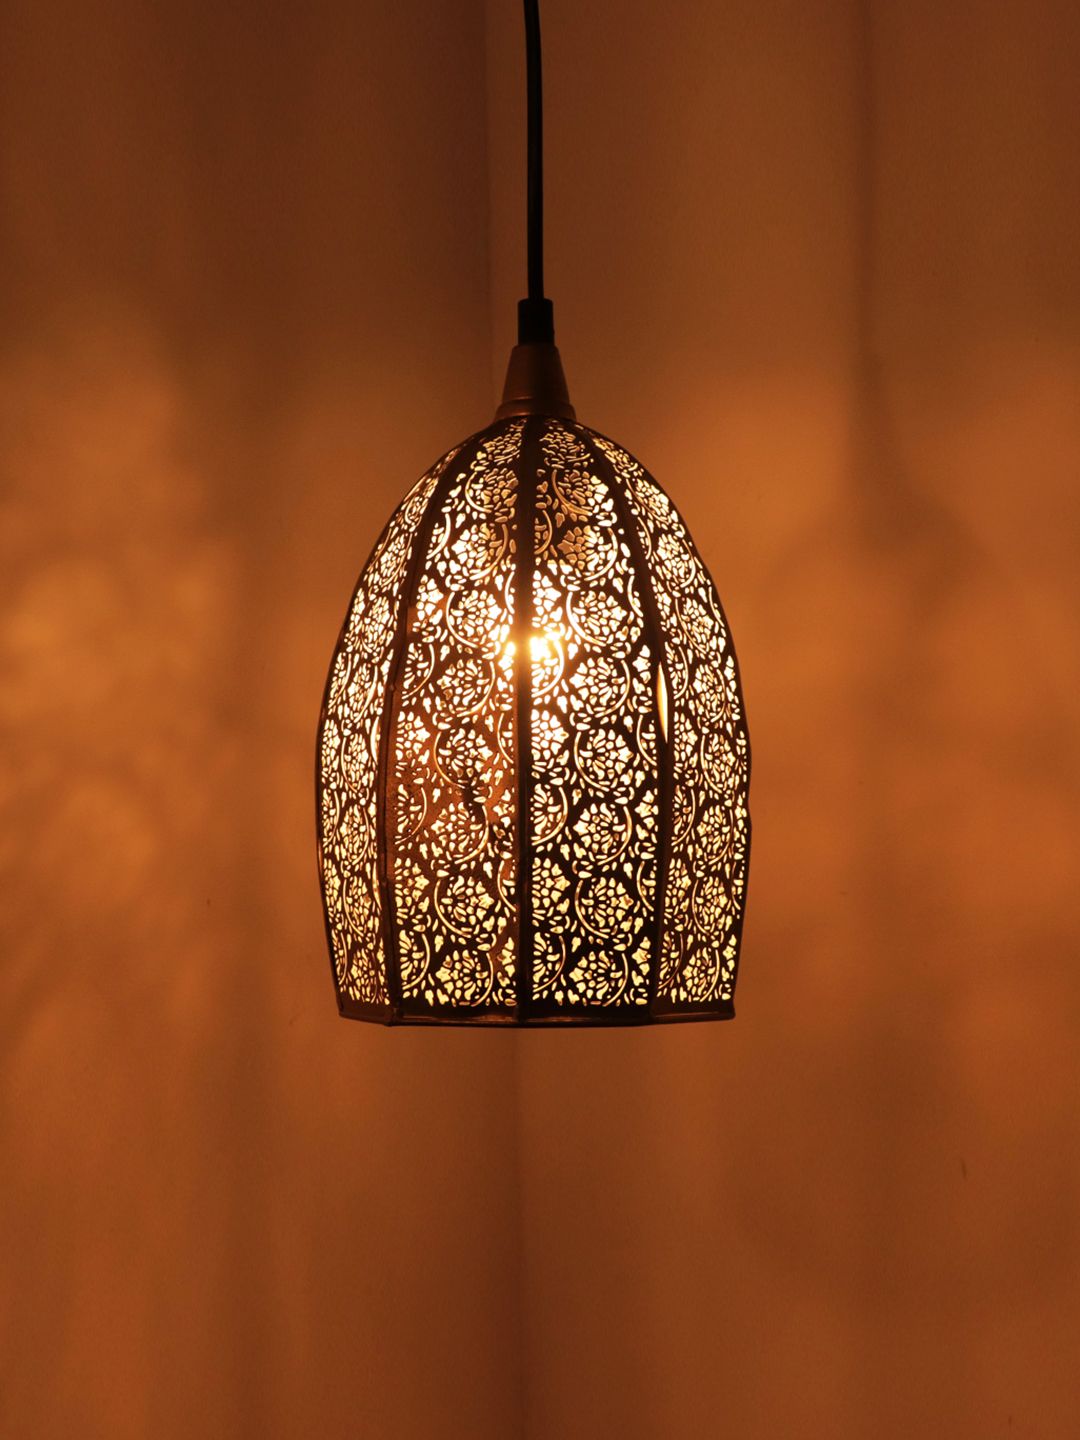 ExclusiveLane Matte Gold-Toned Contemporary Hand-Etched Iron Hanging Pendant Ceiling Lamp Price in India